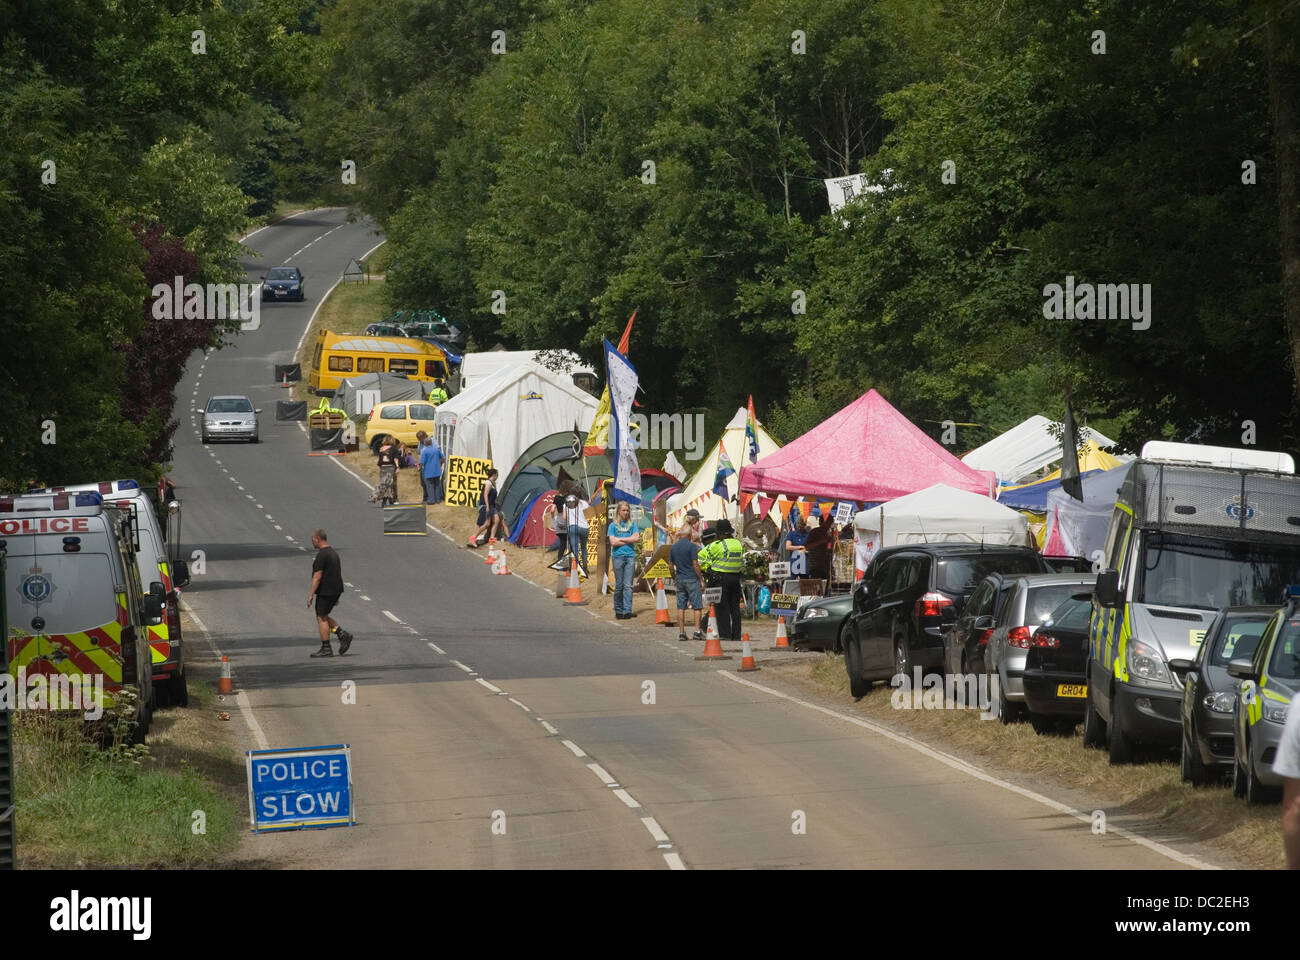 Balcombe West Sussex Regno Unito. Fracking protesta camp. 2013 2010s Inghilterra HOMER SYKES Foto Stock